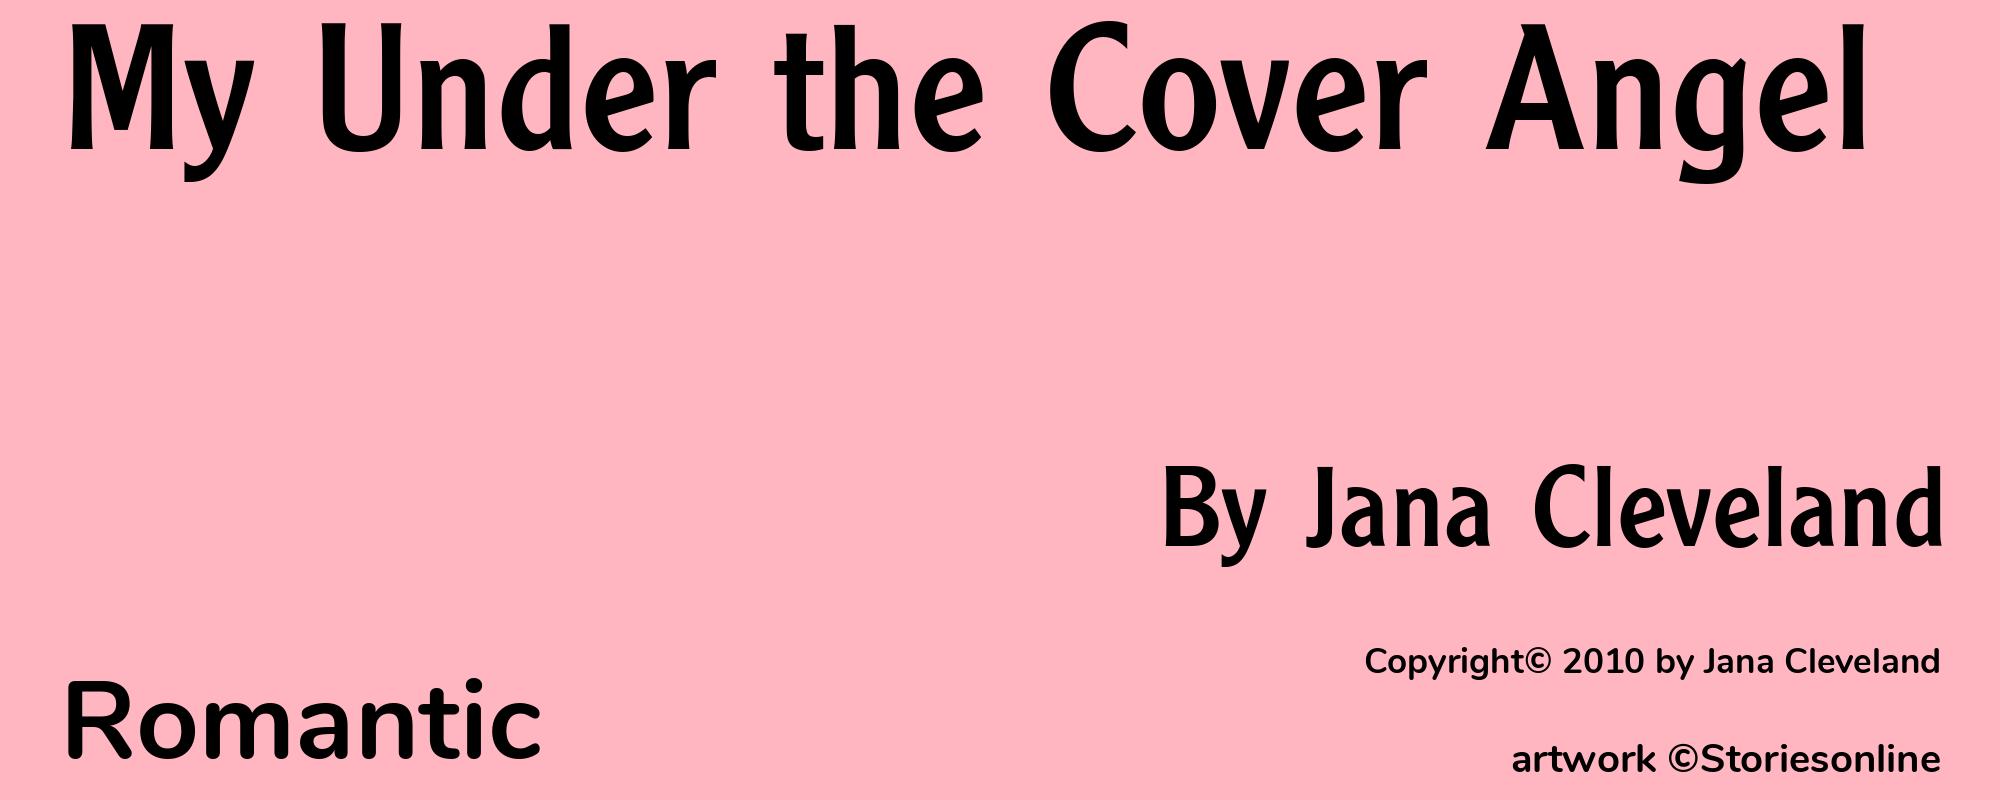 My Under the Cover Angel - Cover